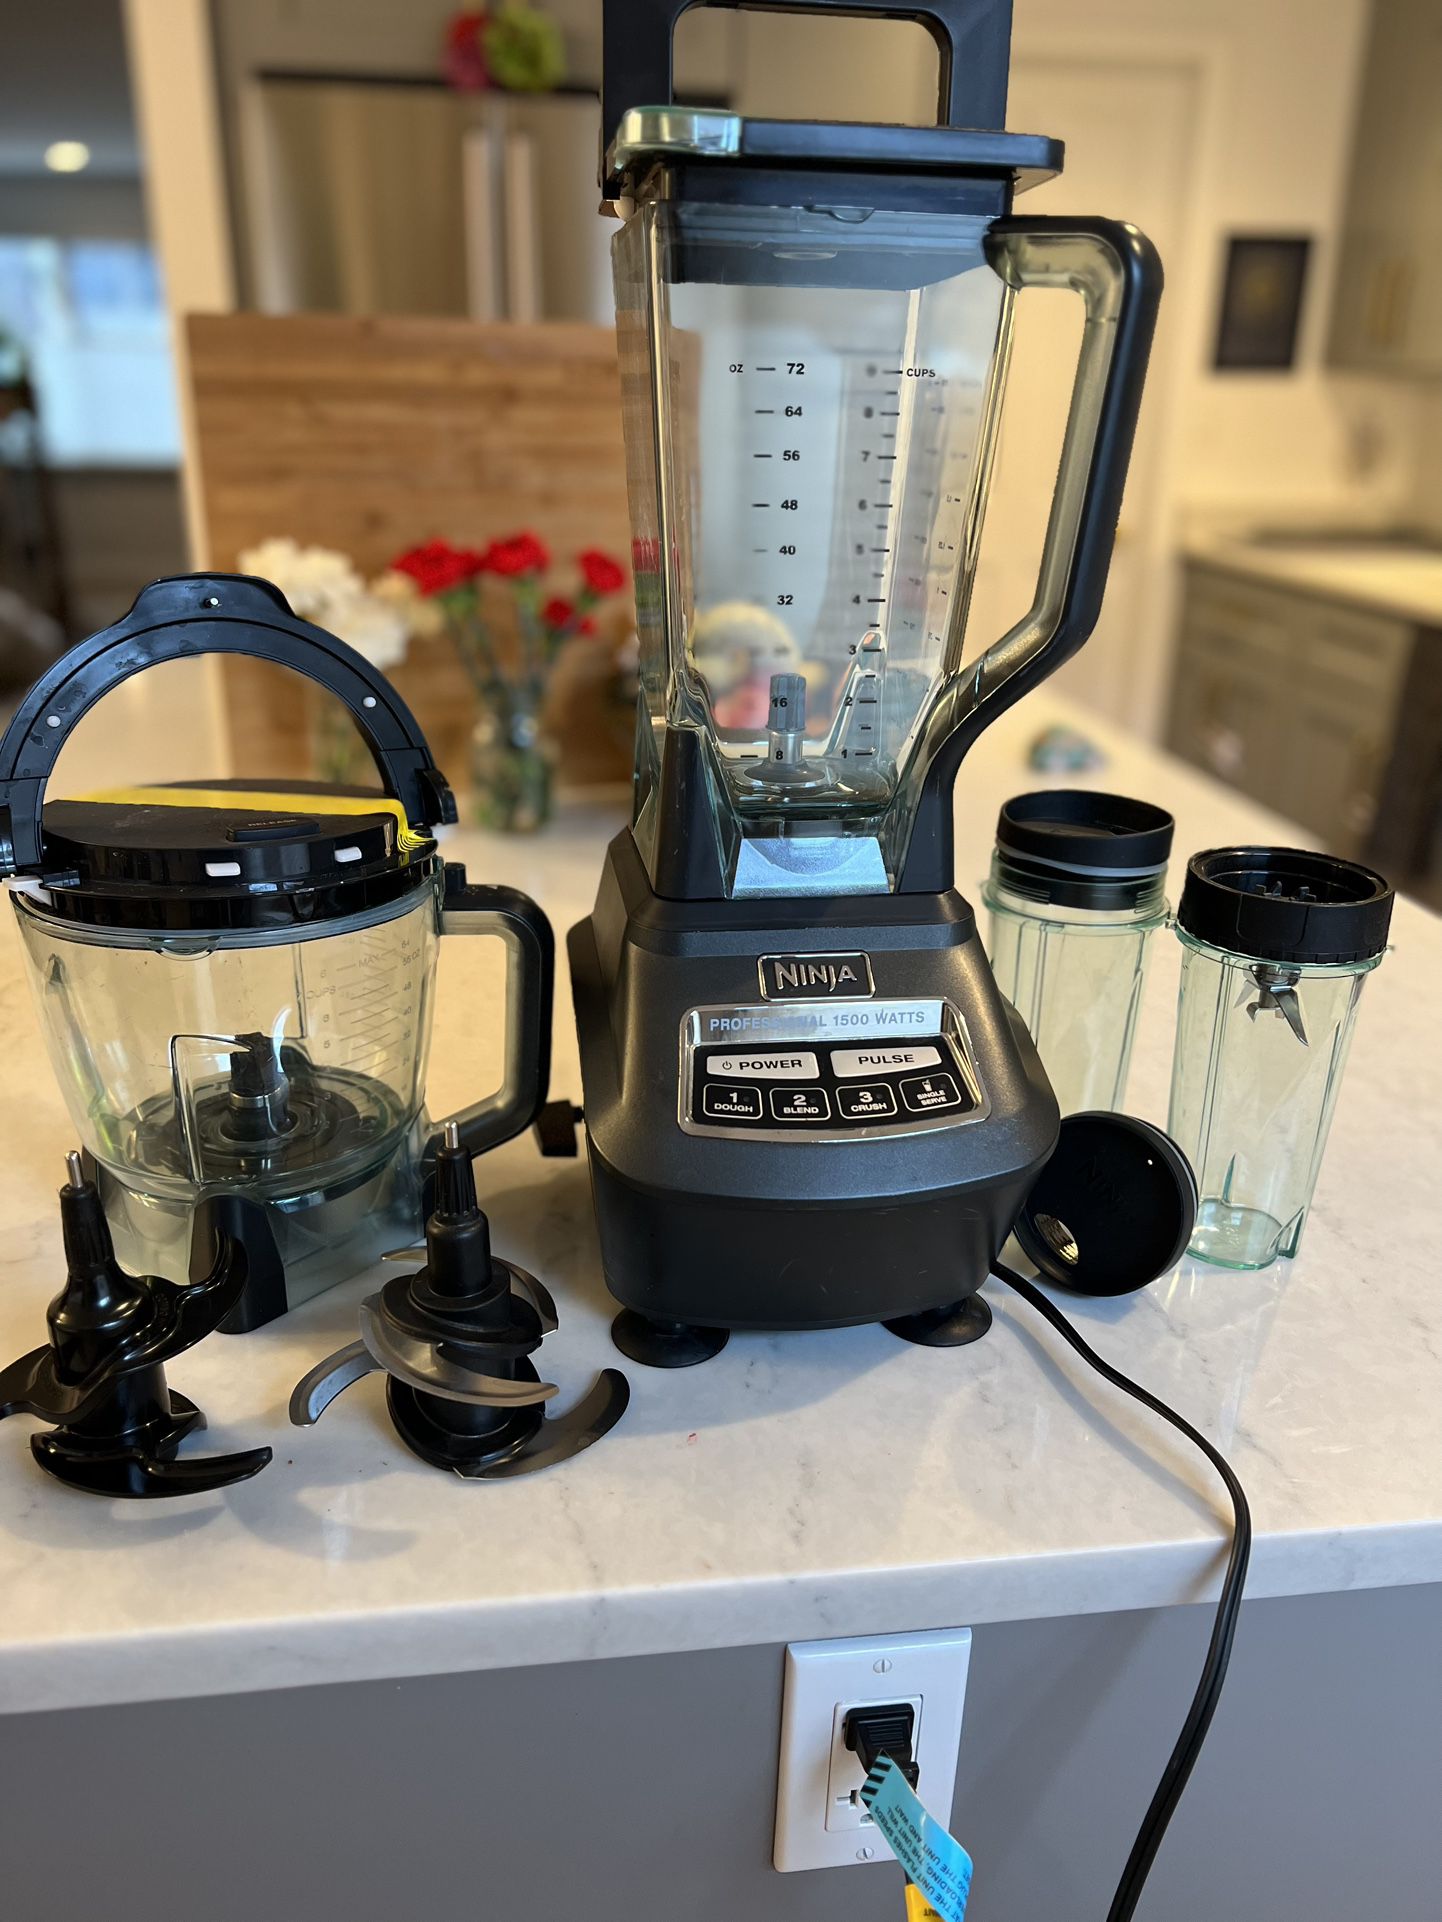 Review Ninja BL770 Mega Kitchen Blender System Smoothies Dough 1500W VERY  POWERFUL! 